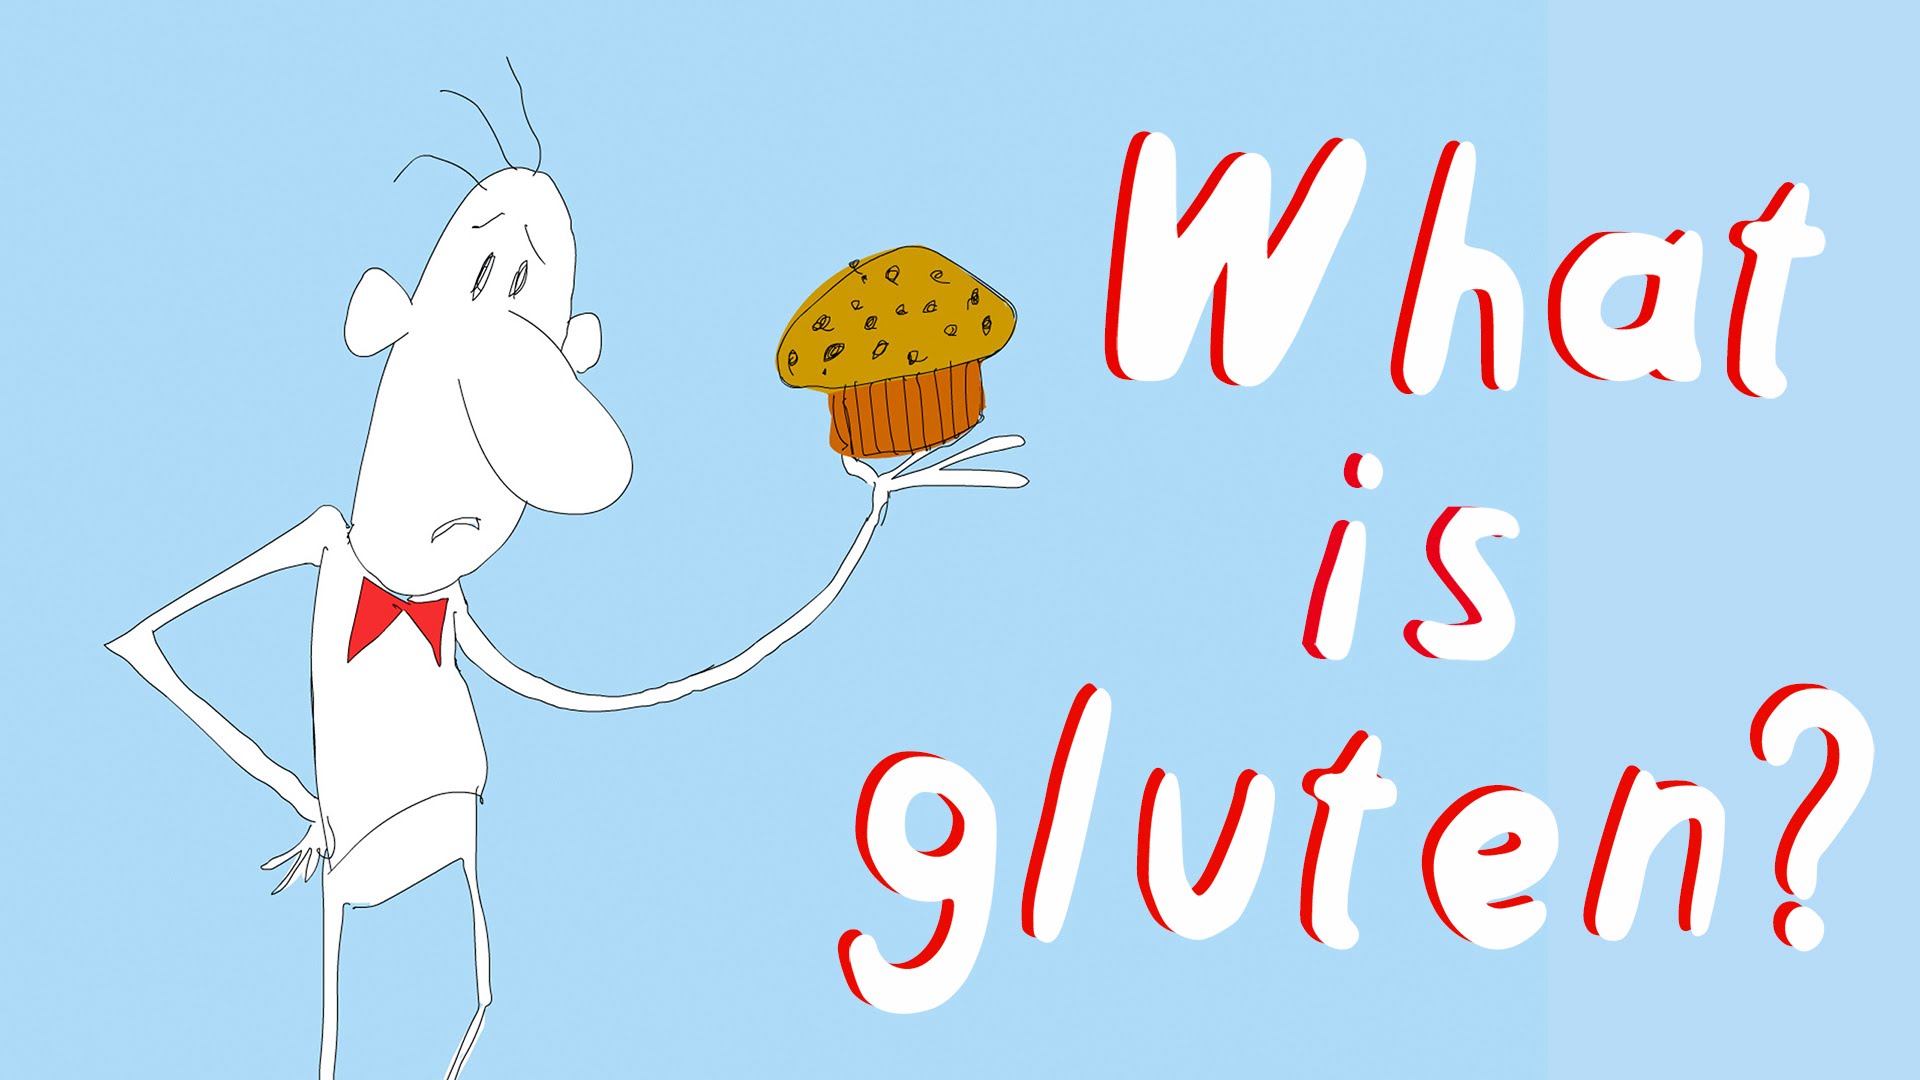 What's the big deal with Gluten?